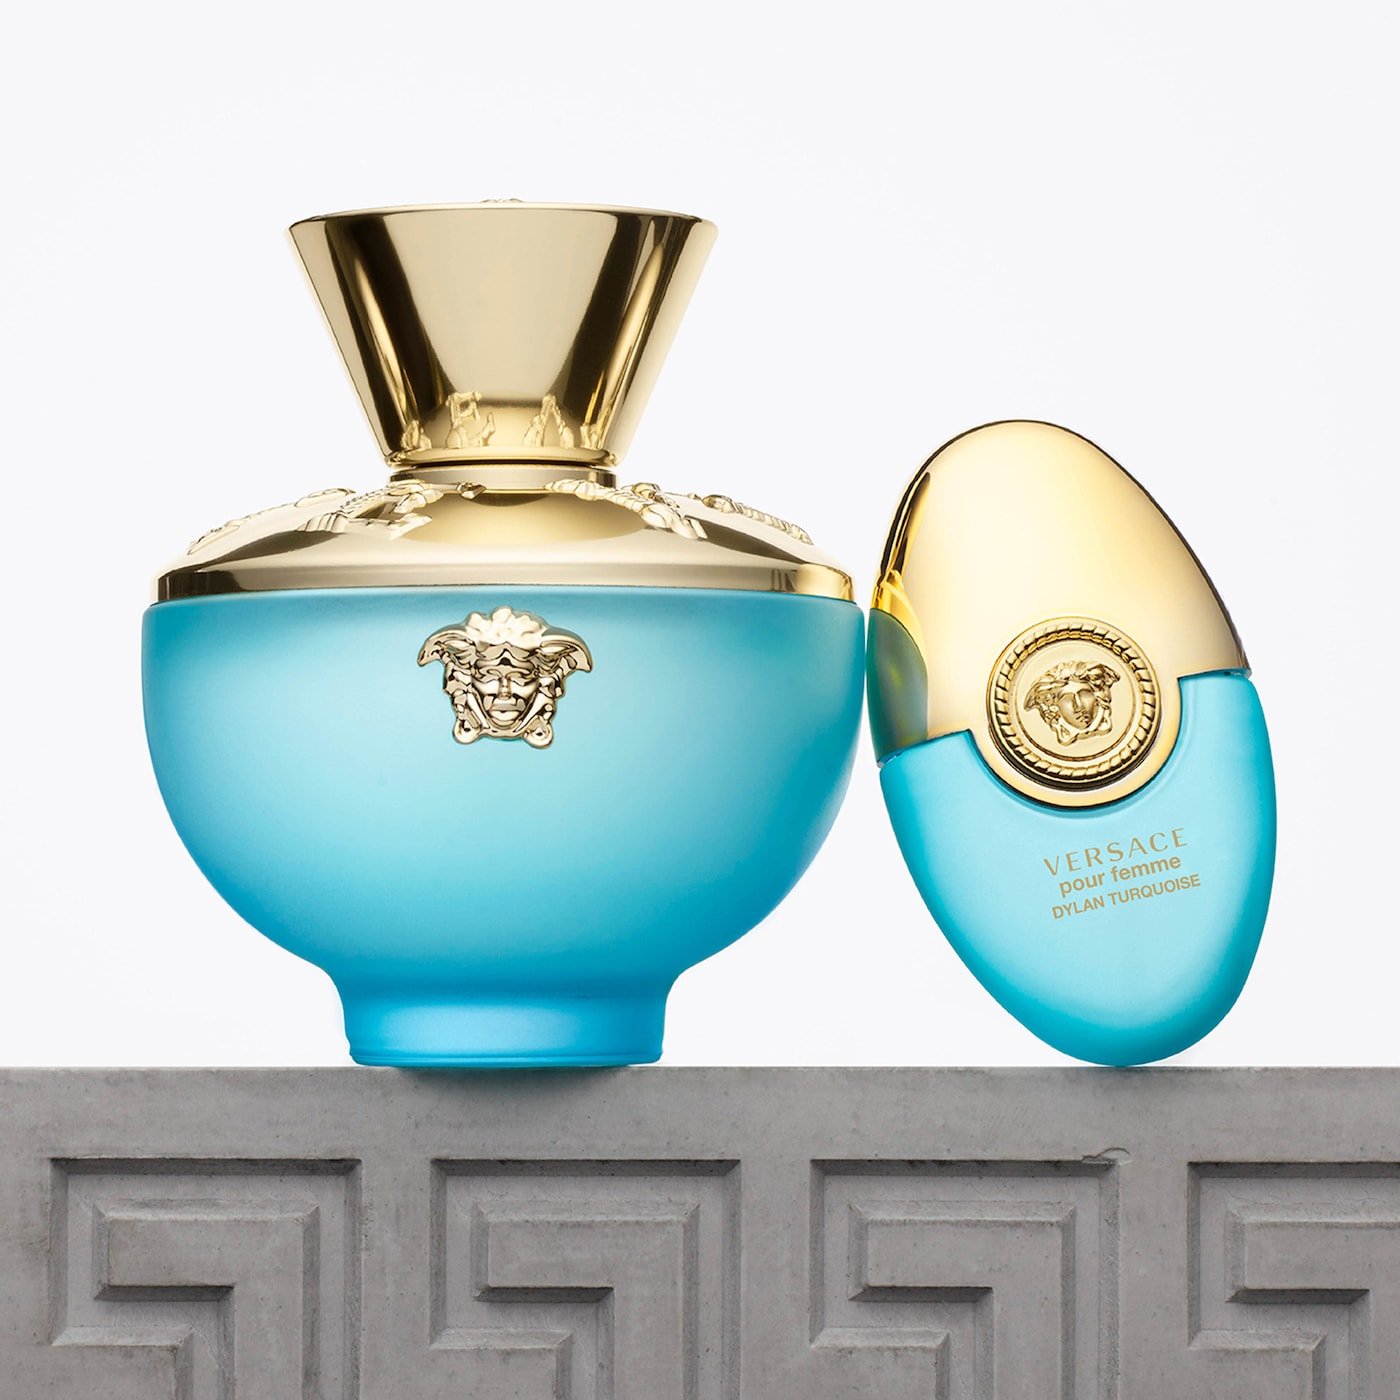 Versace Dylan Turquoise Pour Femme EDT Deluxe Gift Set | My Perfume Shop Australia